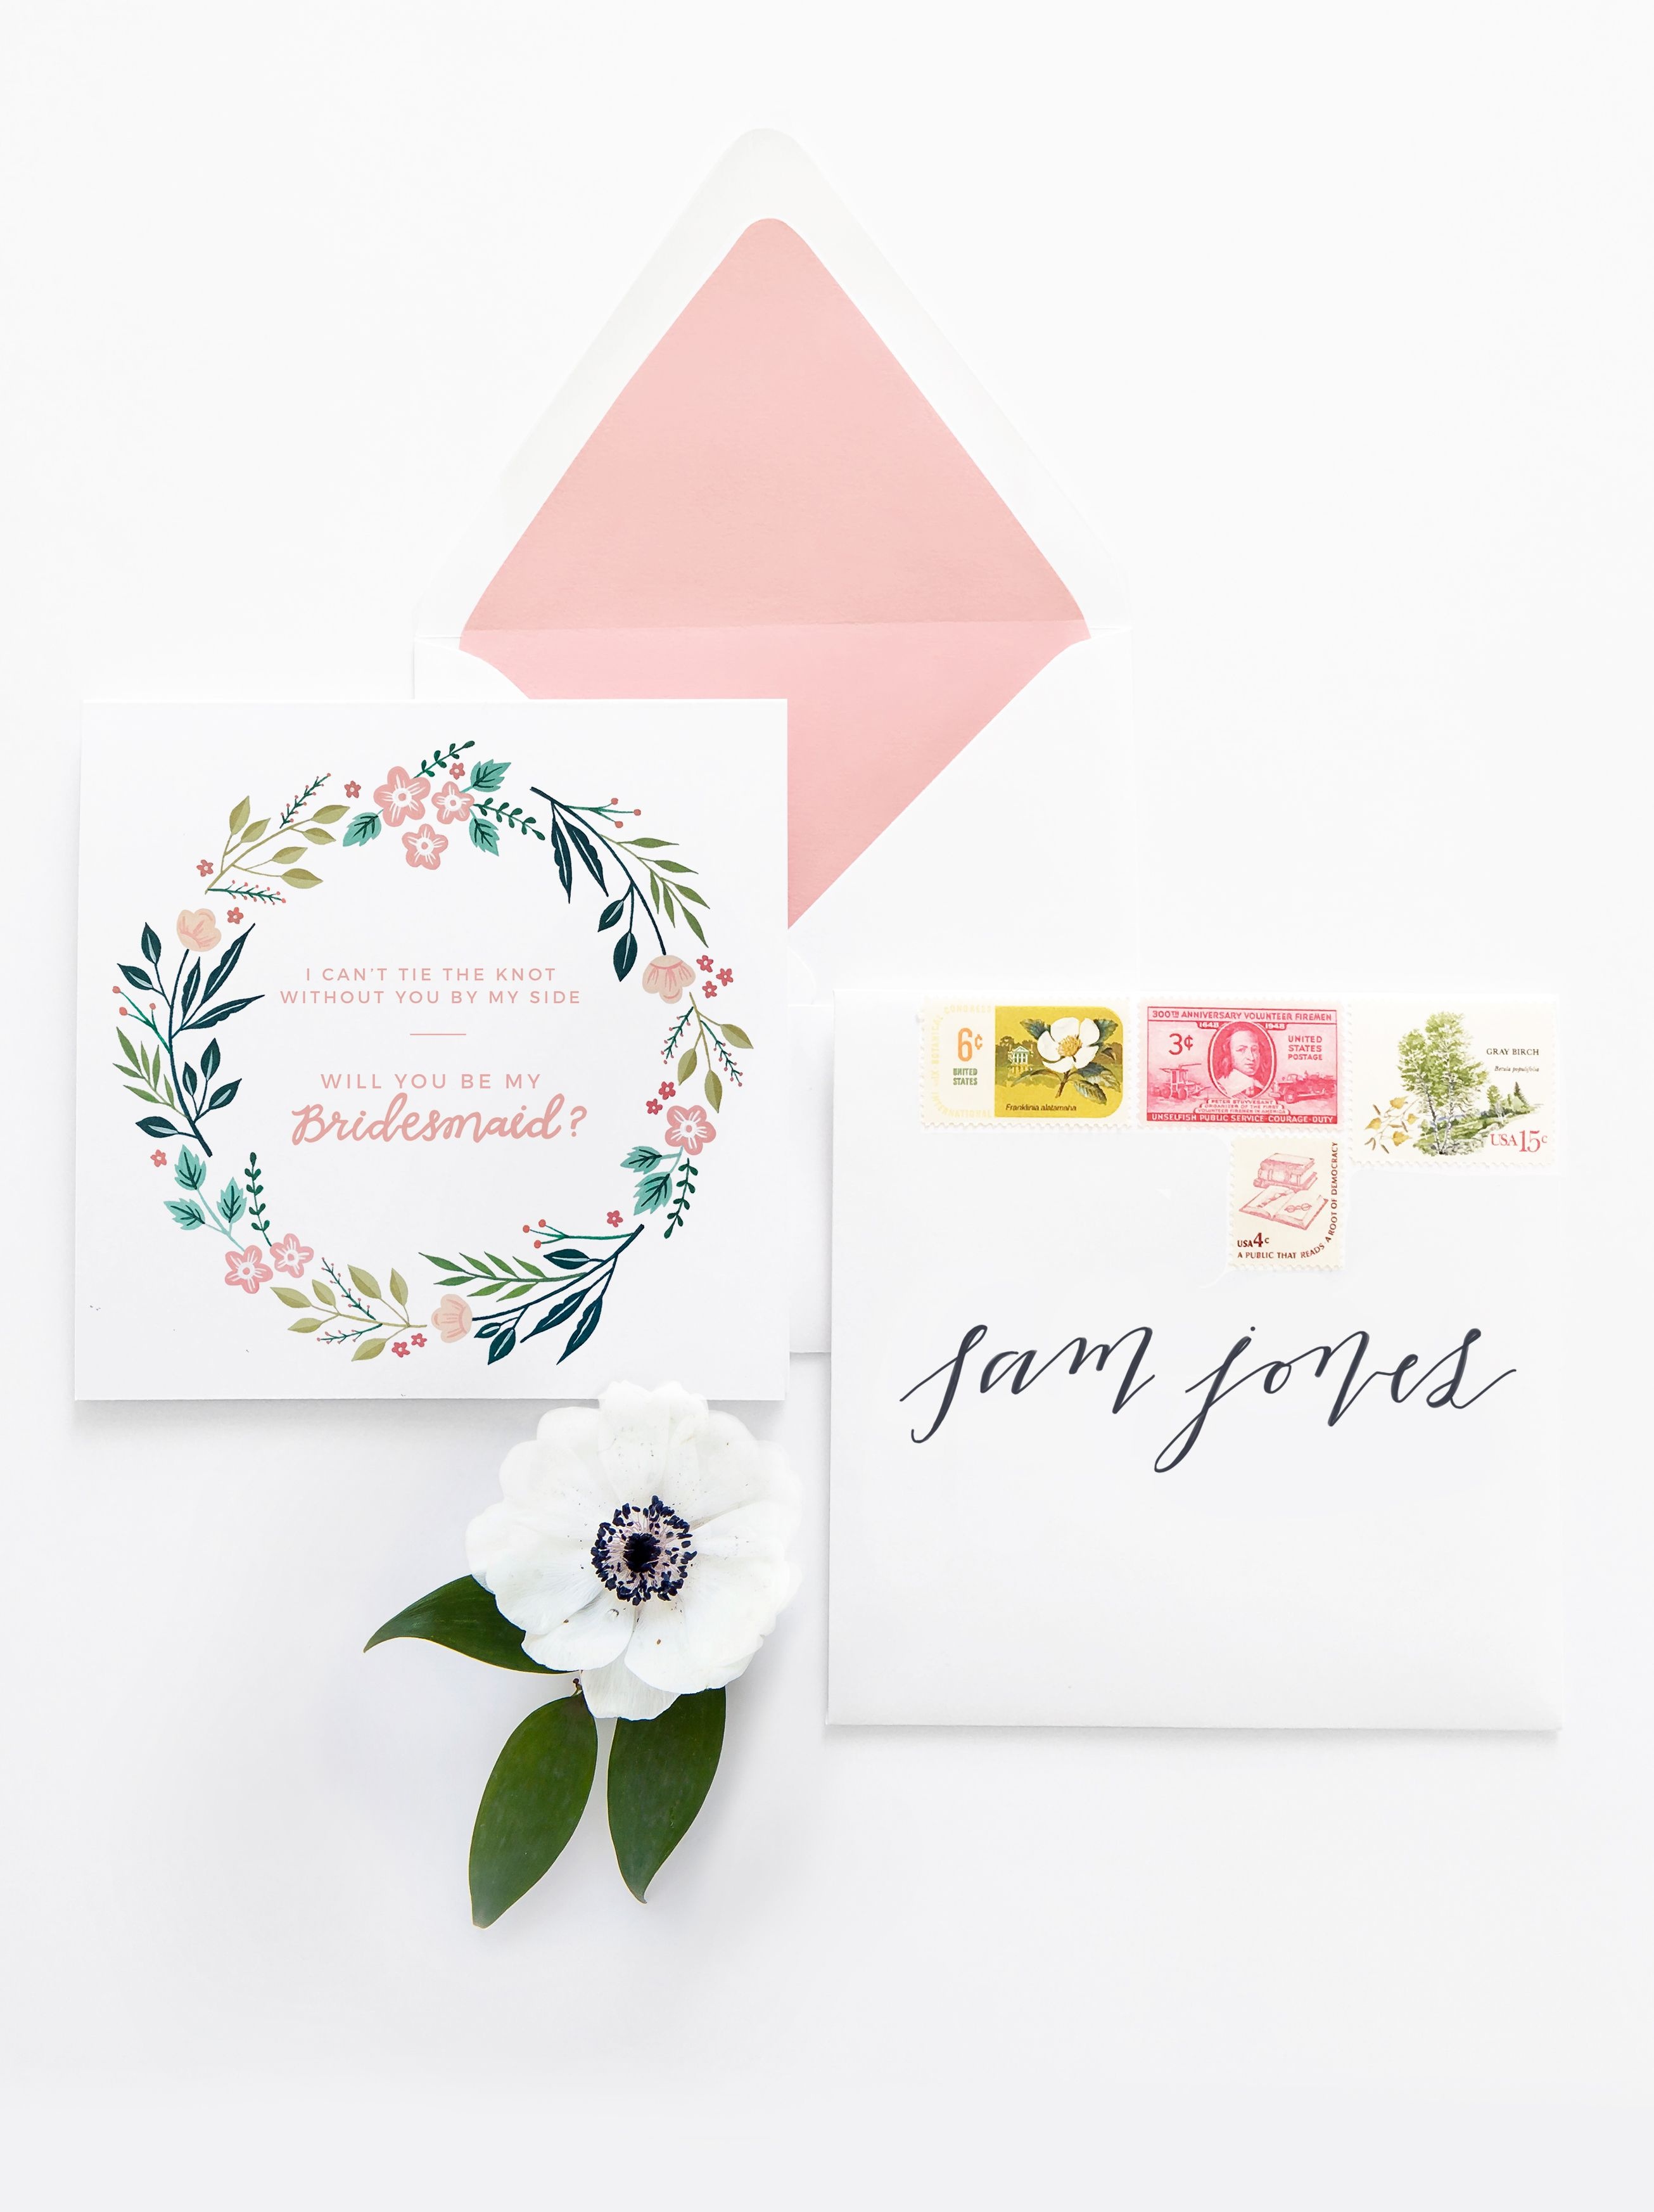 Free Printable - Will You Be My Bridesmaid Card | W E D D I N G - Will You Be My Bridesmaid Free Printable